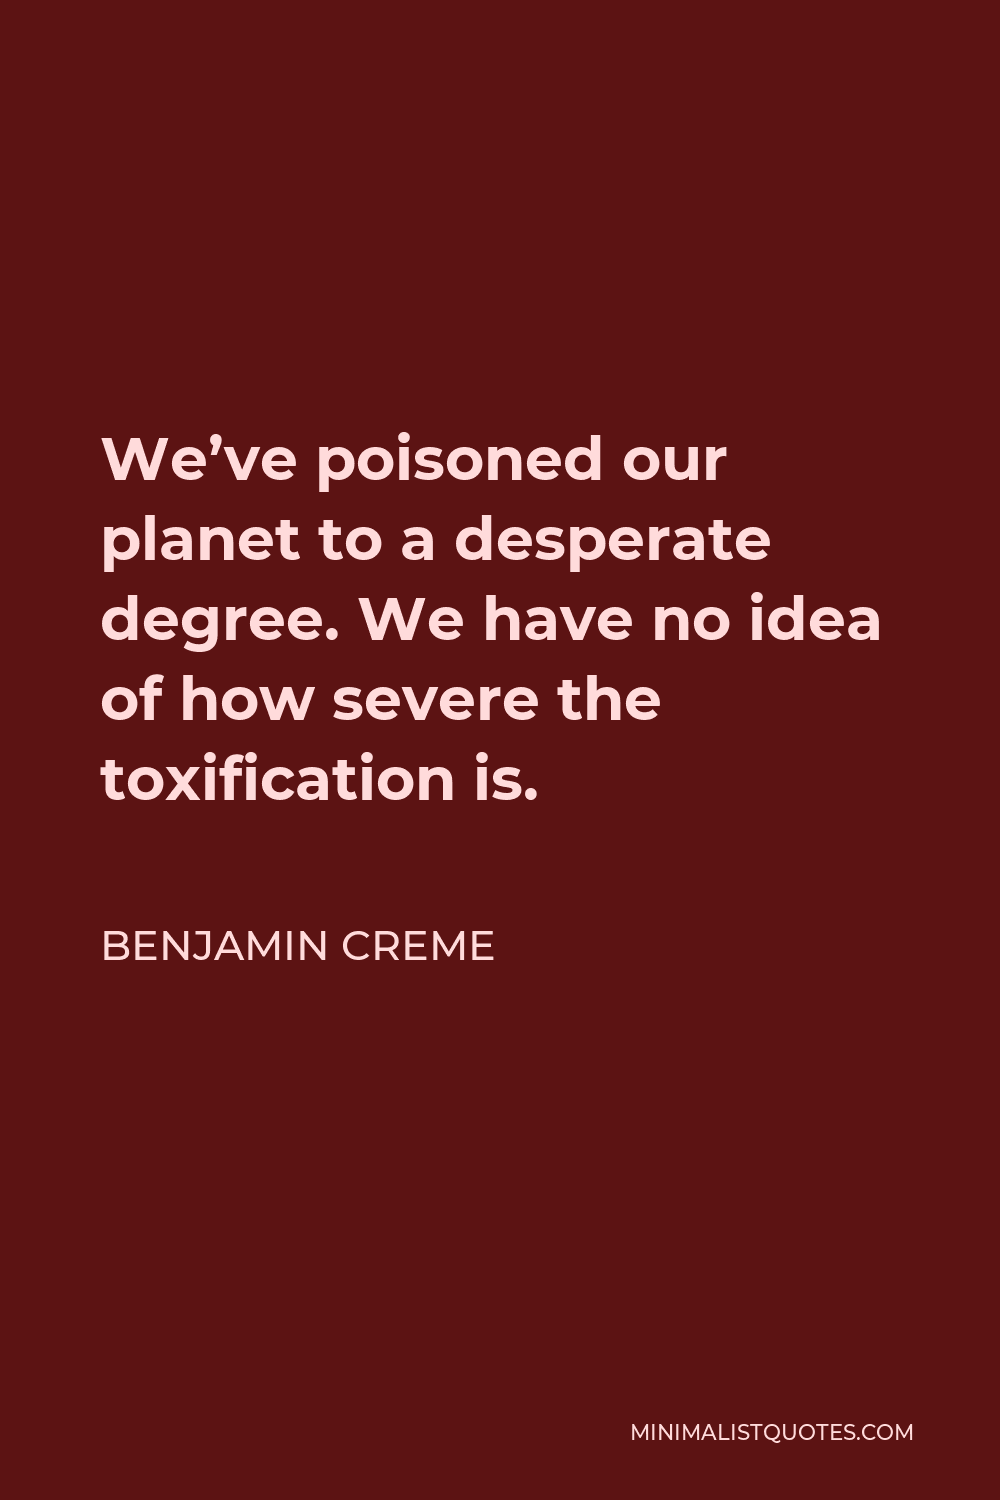 Benjamin Creme Quote - We’ve poisoned our planet to a desperate degree. We have no idea of how severe the toxification is.